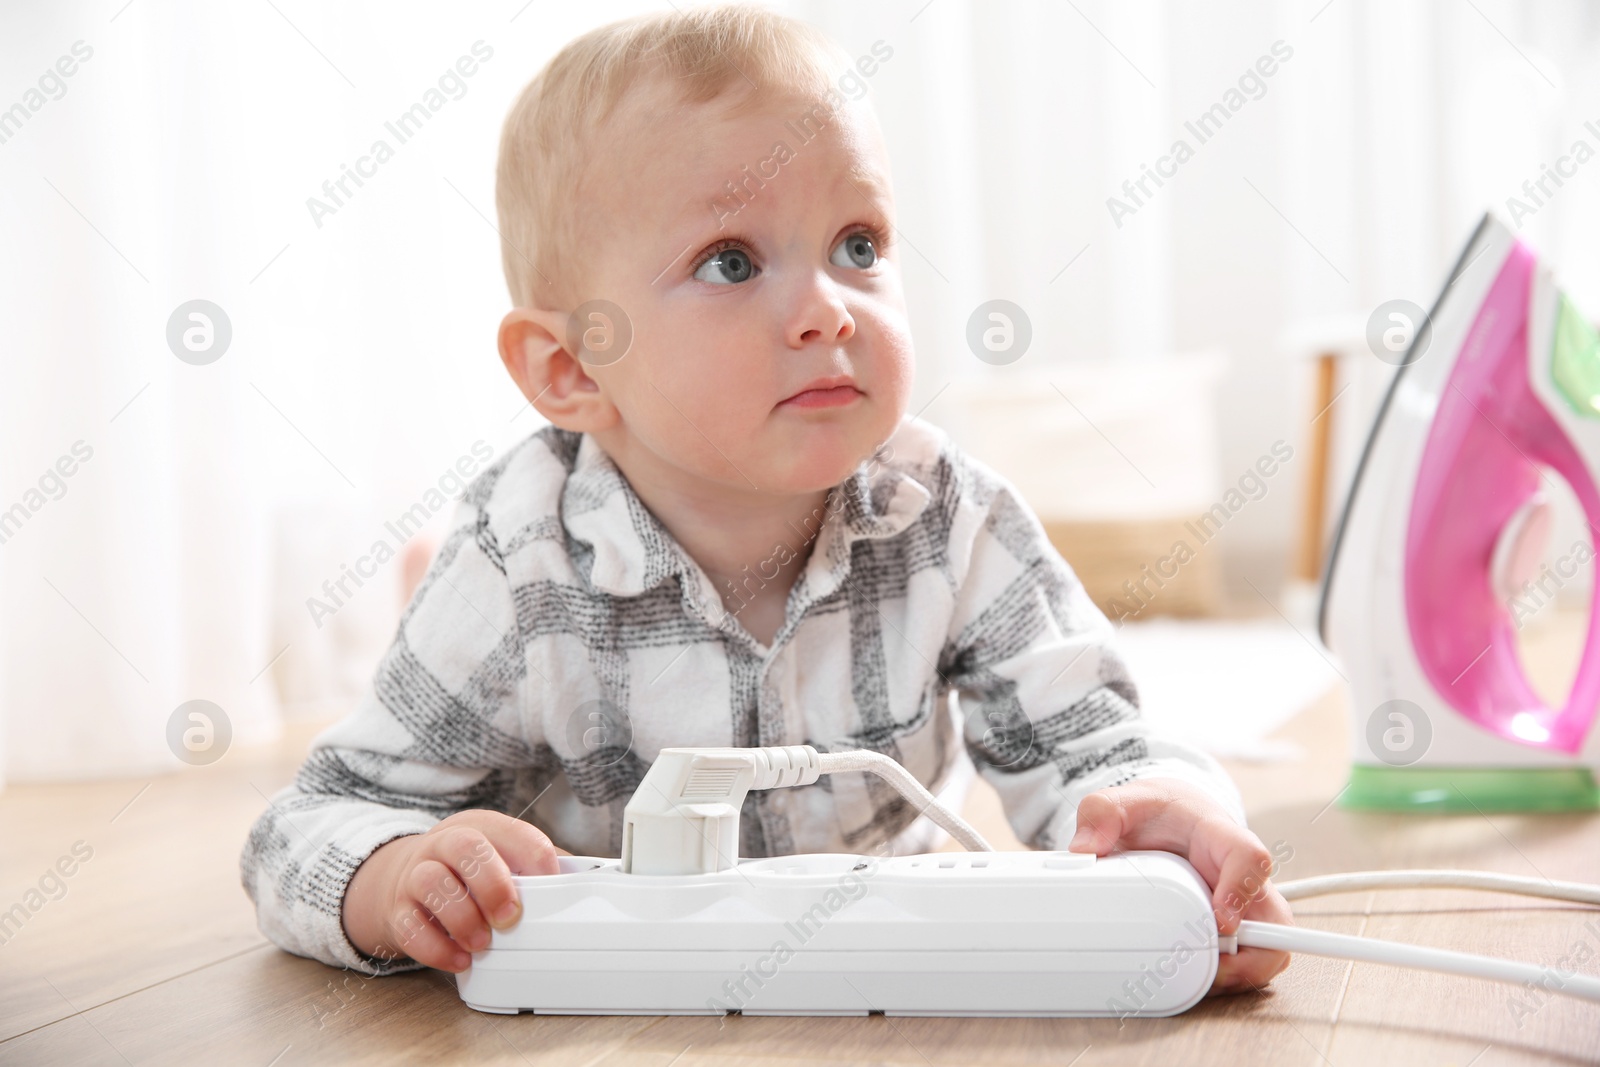 Photo of Little child playing with power strip and iron plug on floor indoors. Dangerous situation